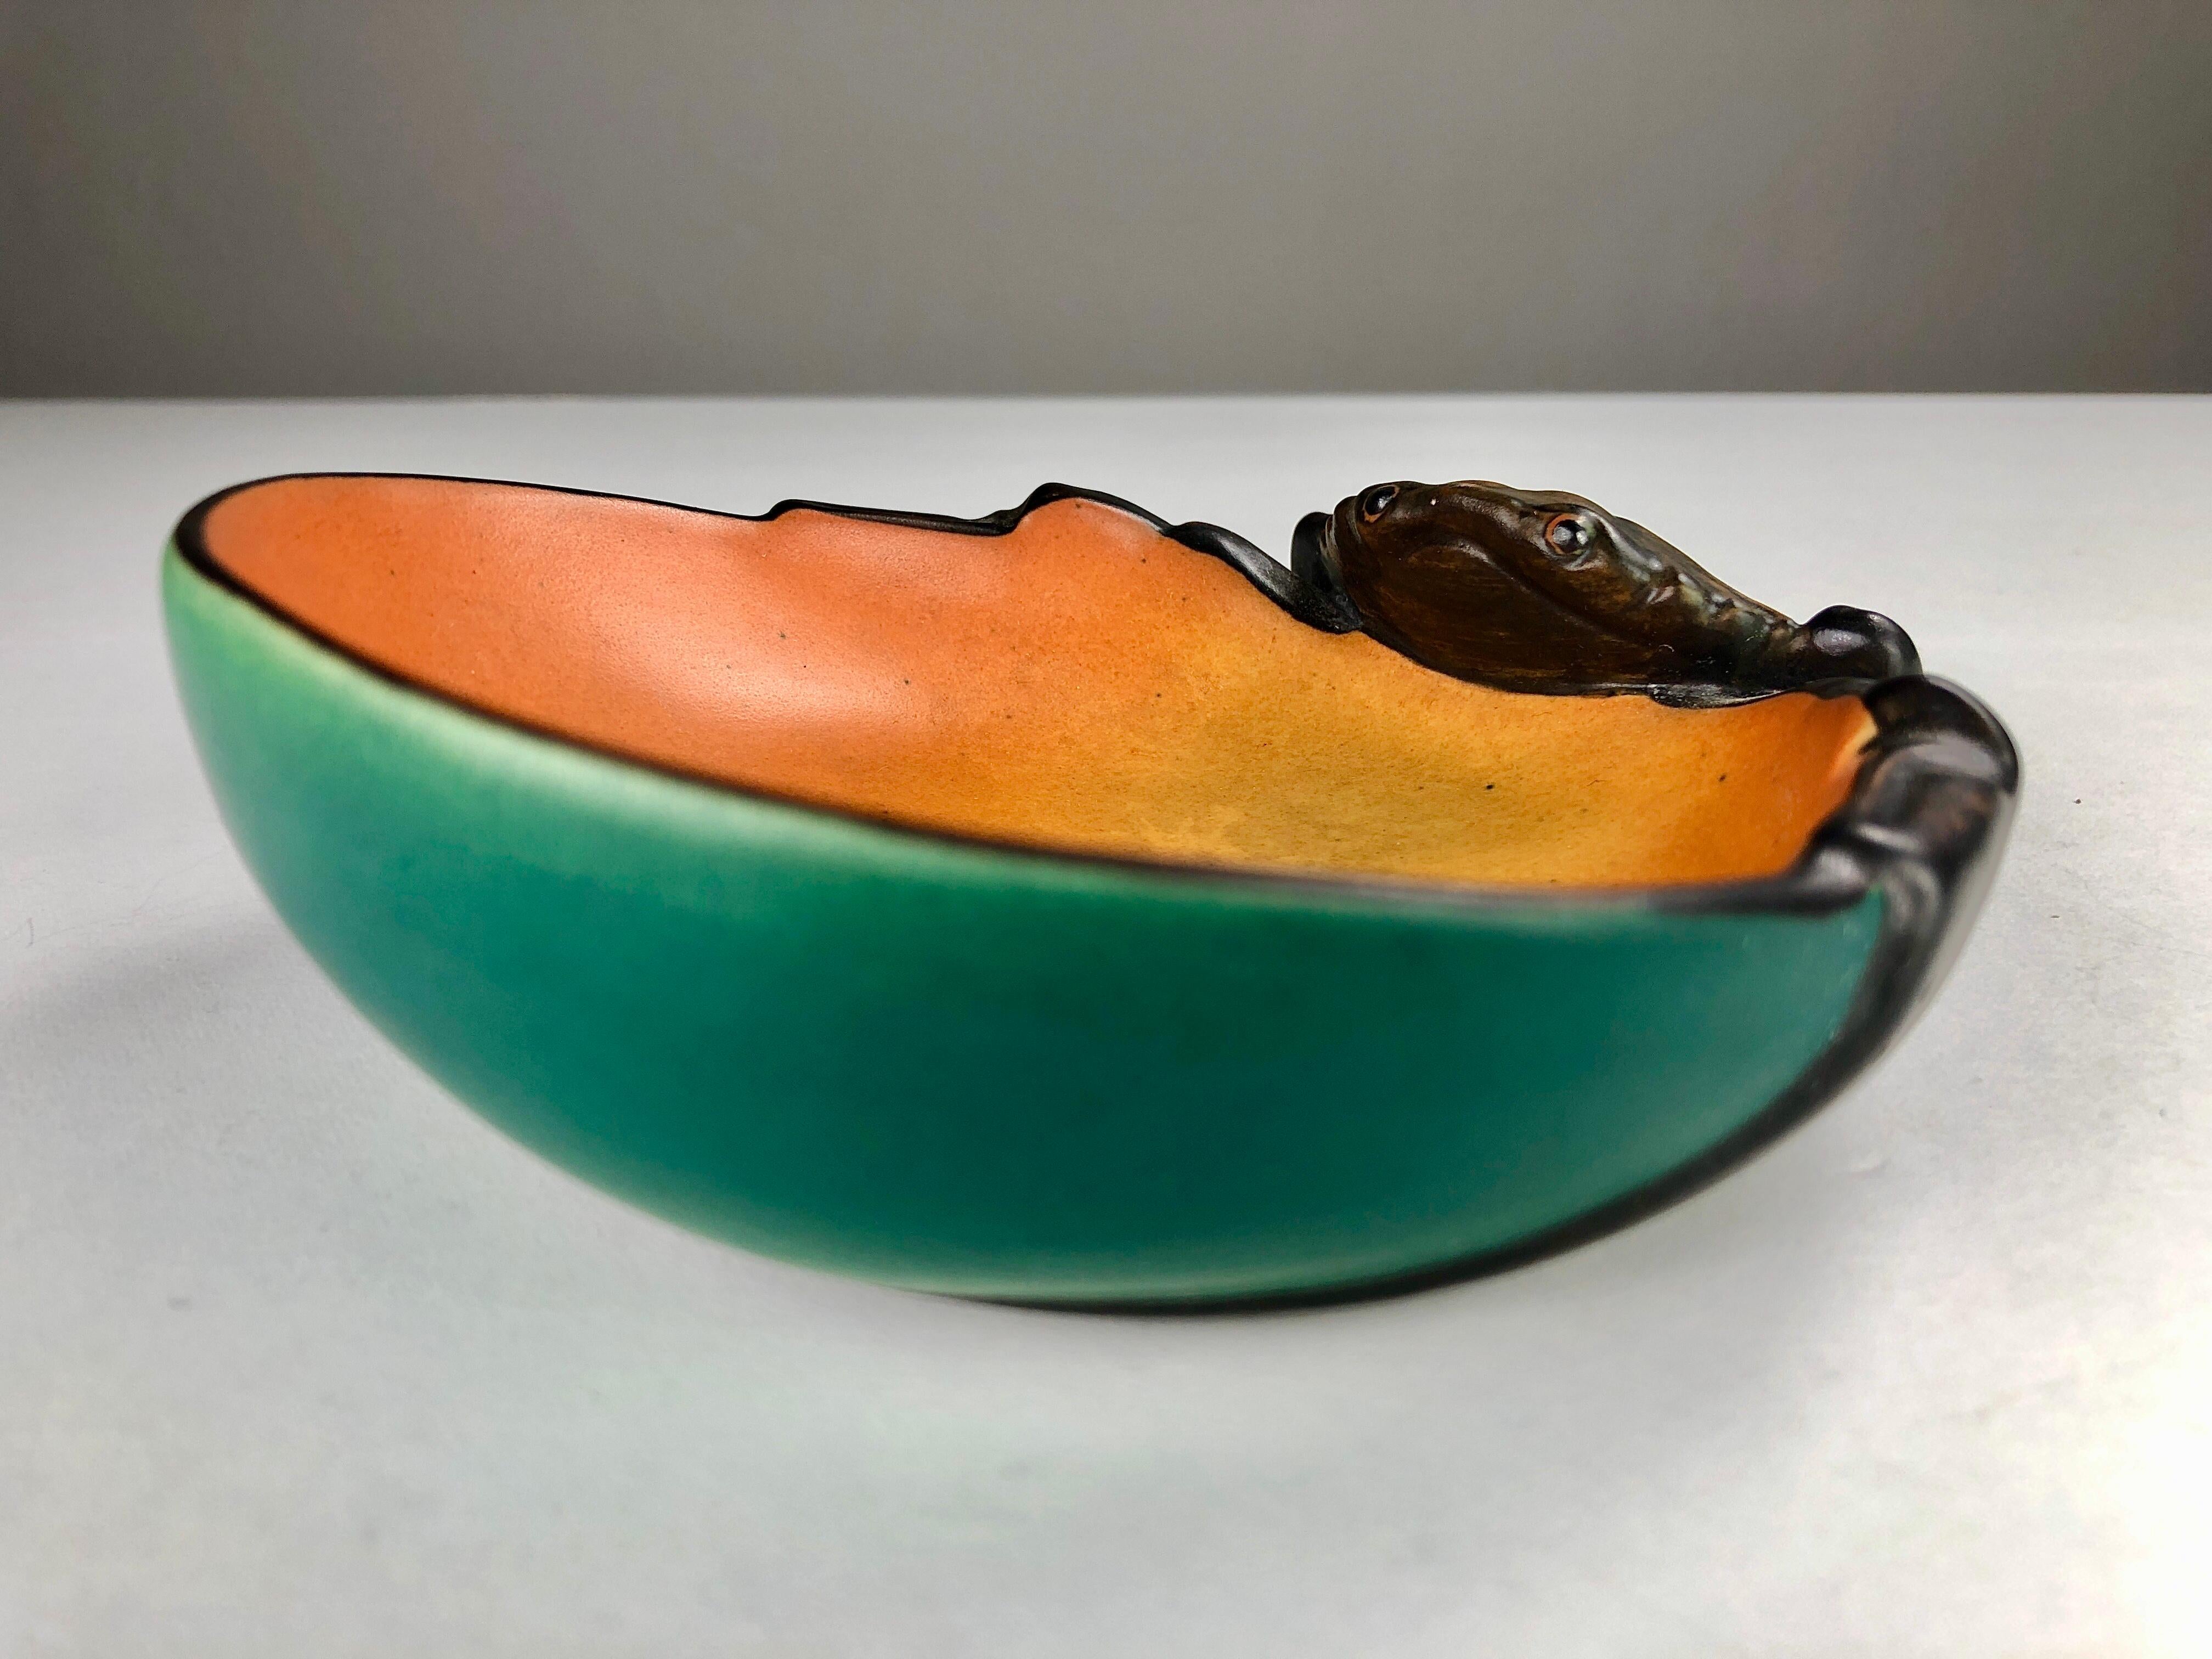 Danish Hand-Crafted Art Nouveau Ash Tray / Bowl by Georg Jensen for Ipsens Enke In Good Condition For Sale In Knebel, DK